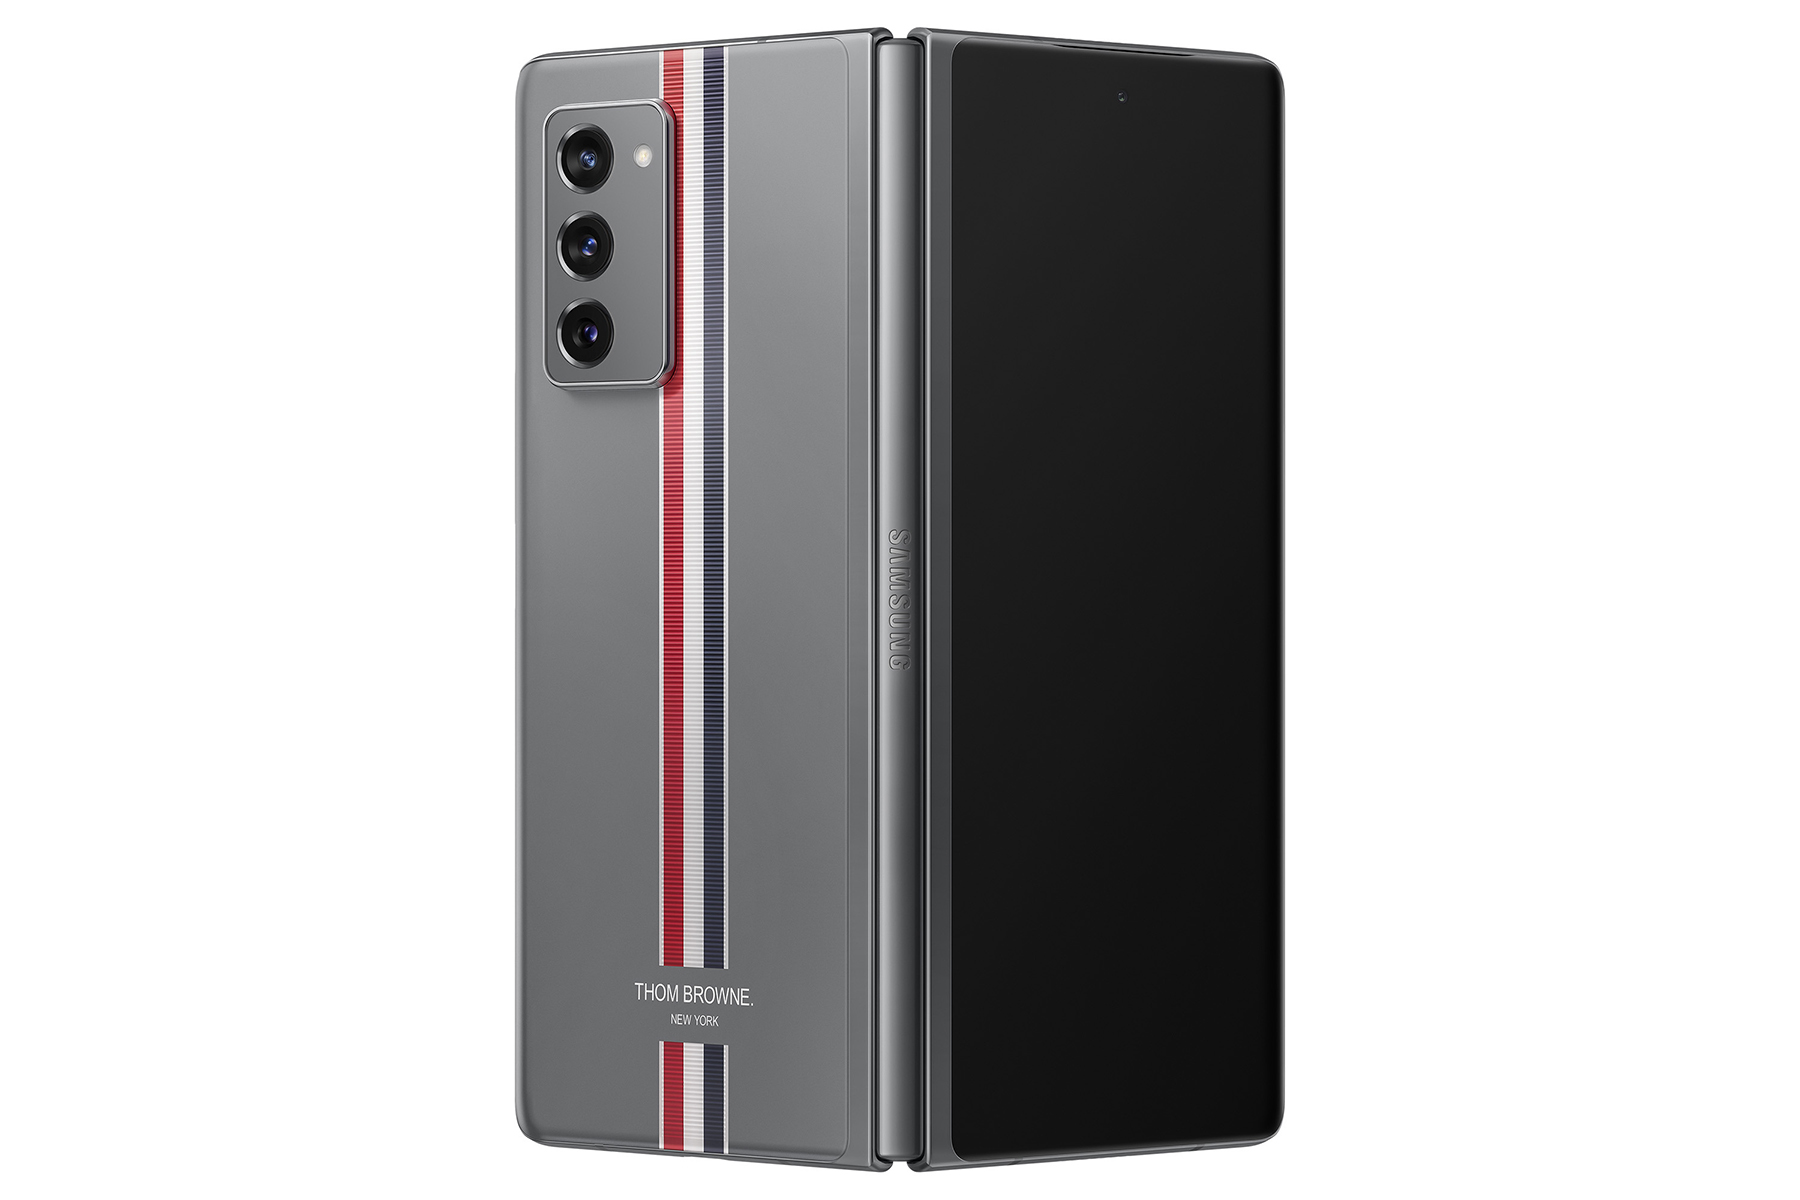 Galaxy Z Fold2 Thom Browne Edition, rear camera view, partially unfolded.